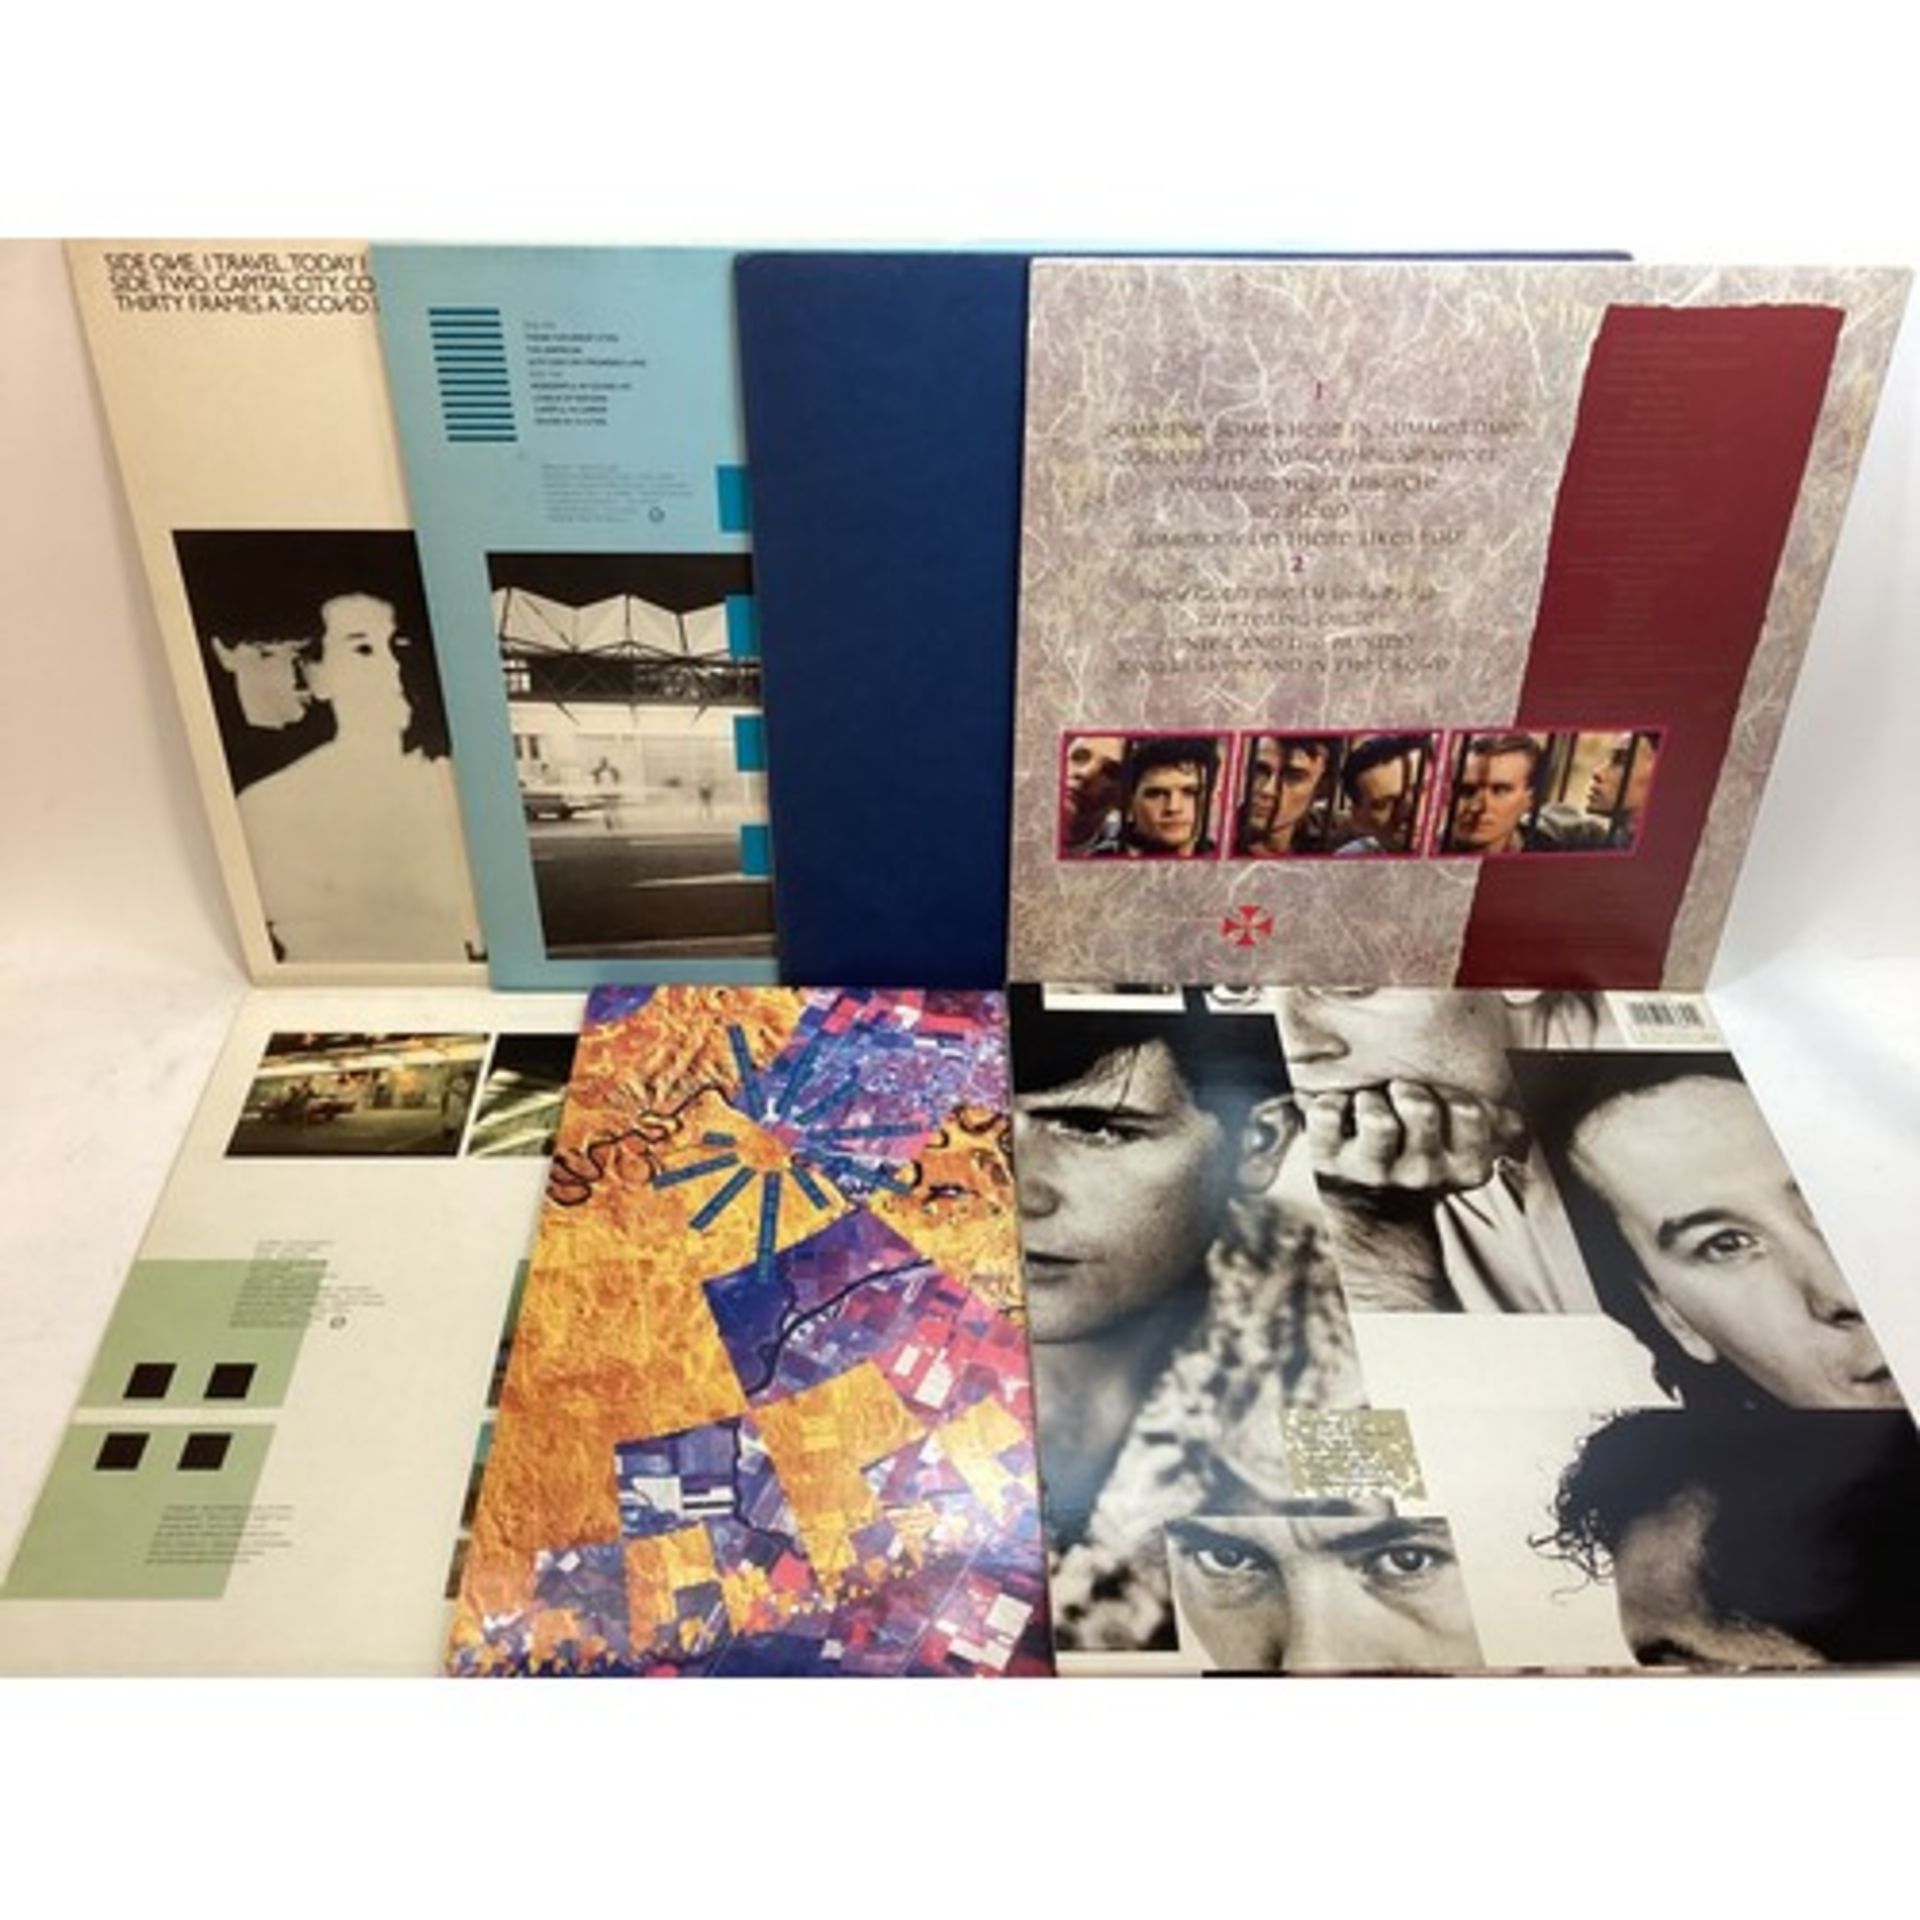 COLLECTION OF 7 SIMPLE MINDS VINYL ALBUMS. - Image 2 of 2